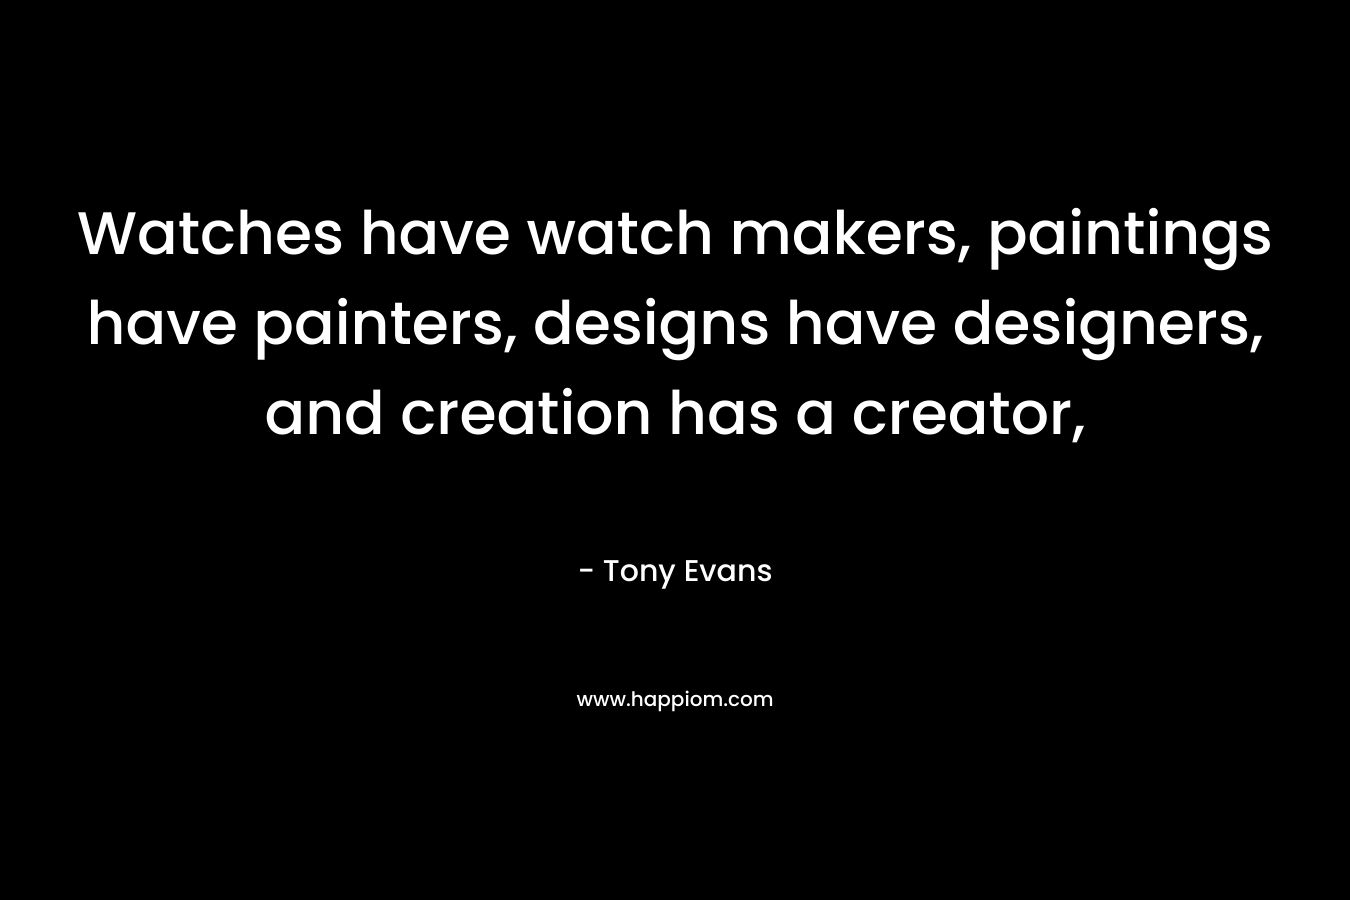 Watches have watch makers, paintings have painters, designs have designers, and creation has a creator,